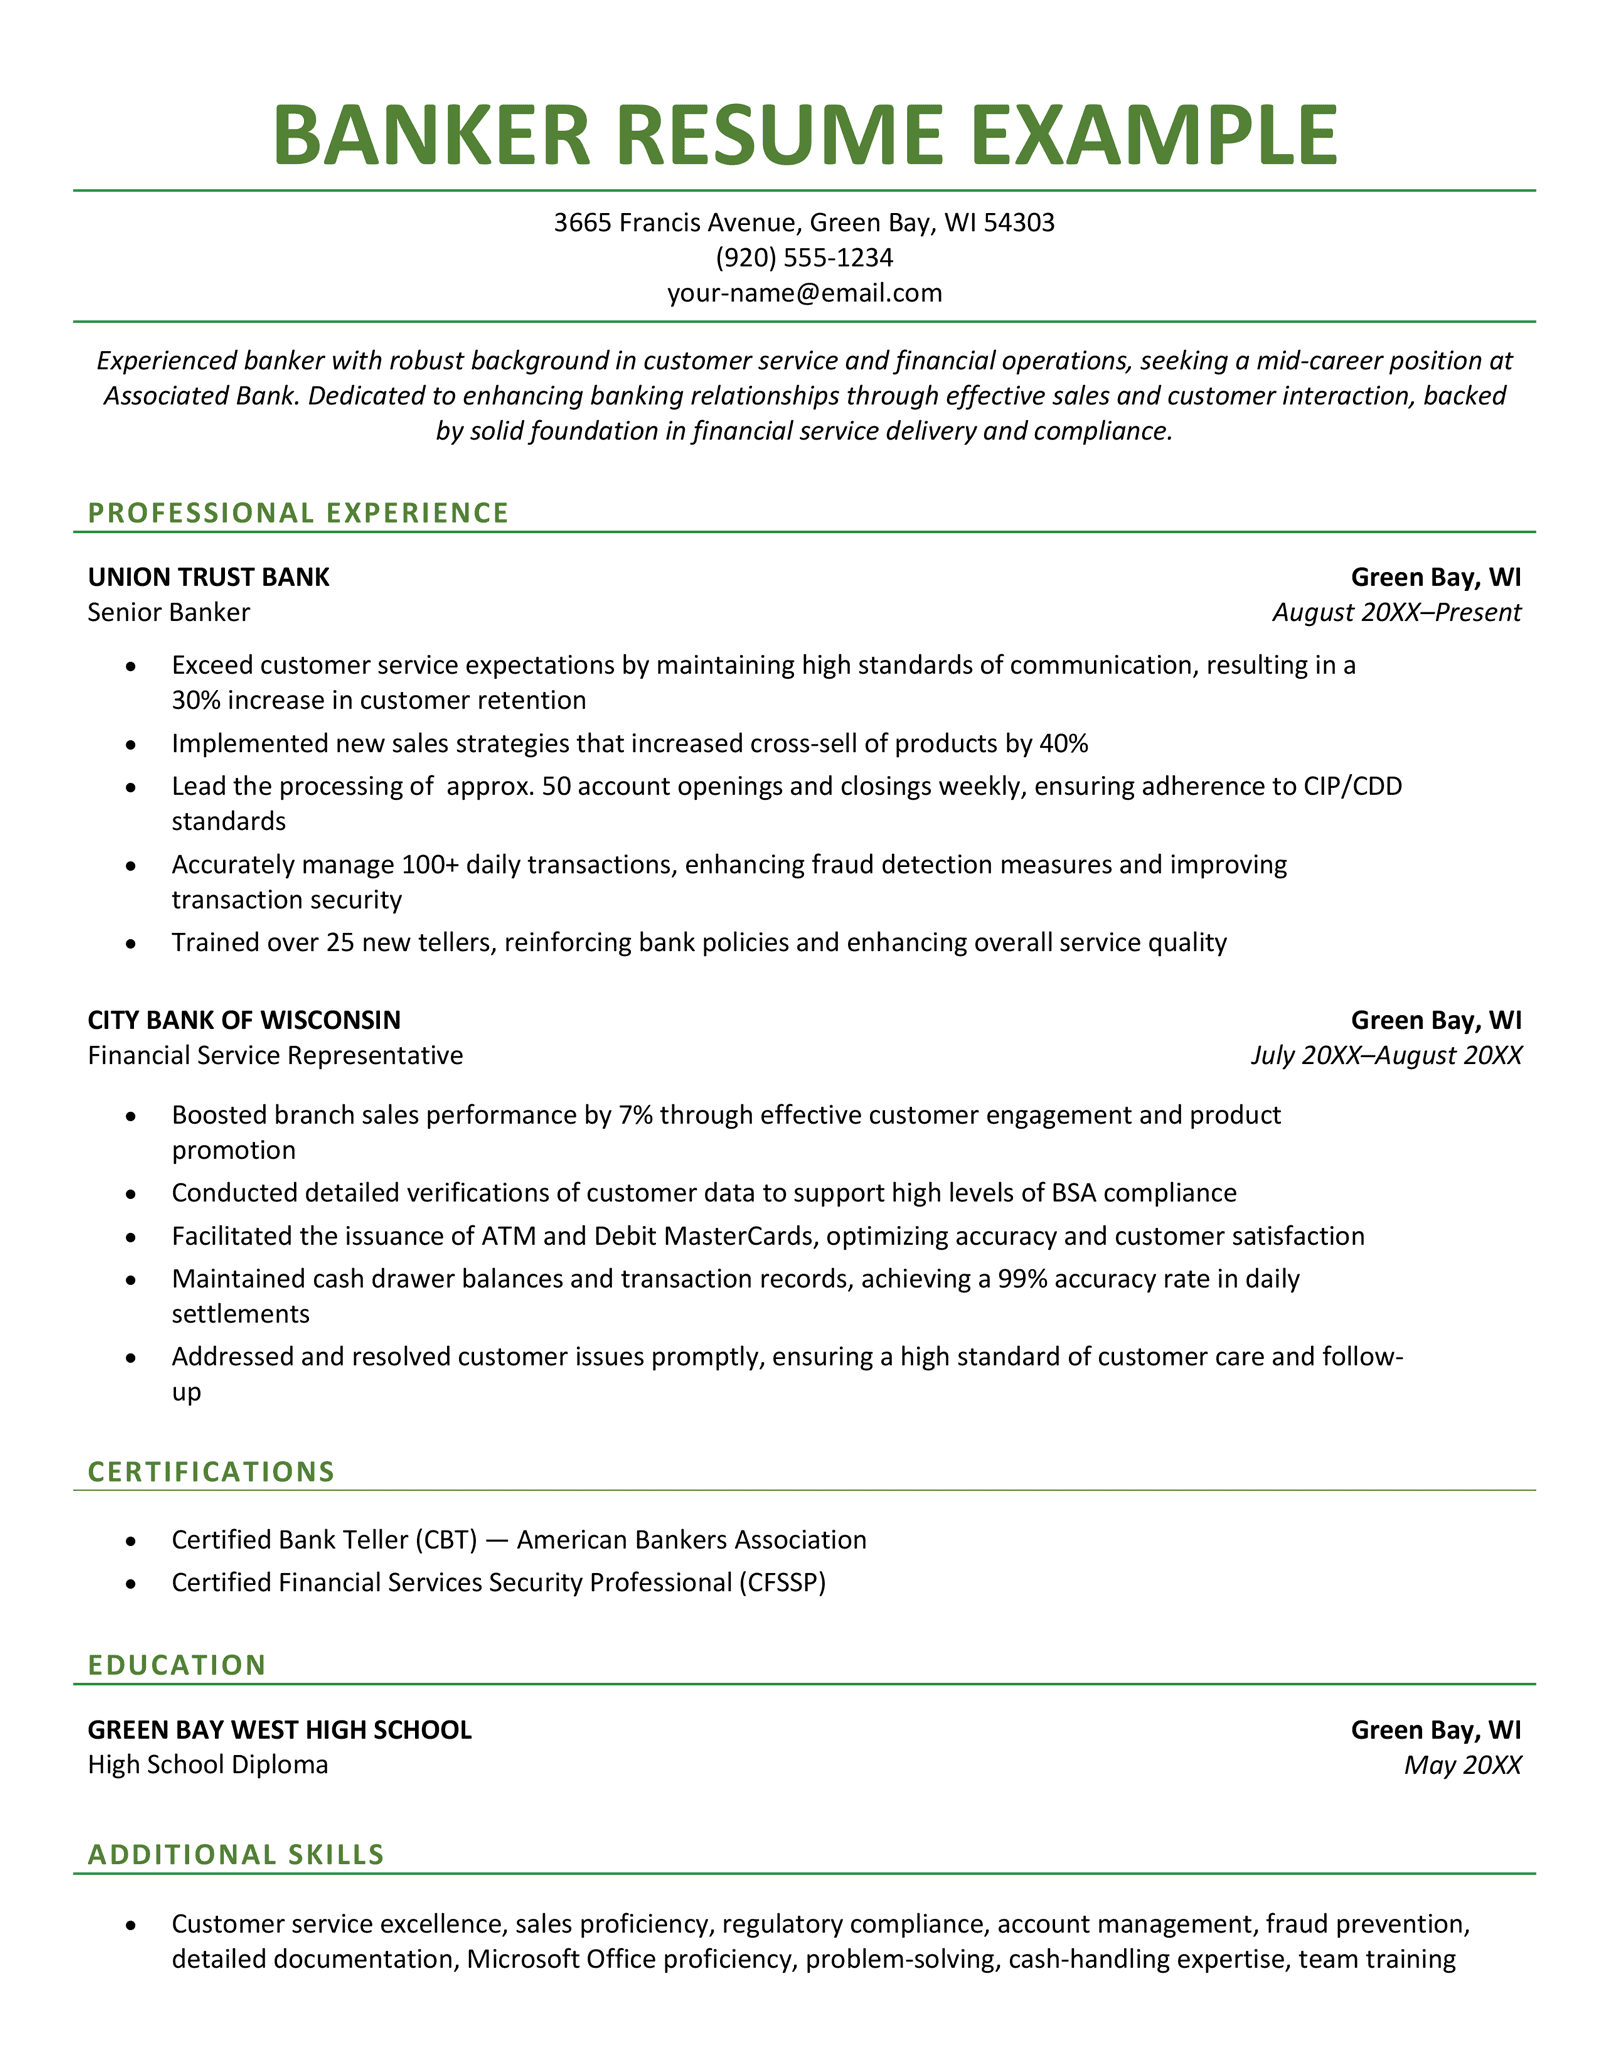 A banker resume example that uses a simple template with a green color scheme.